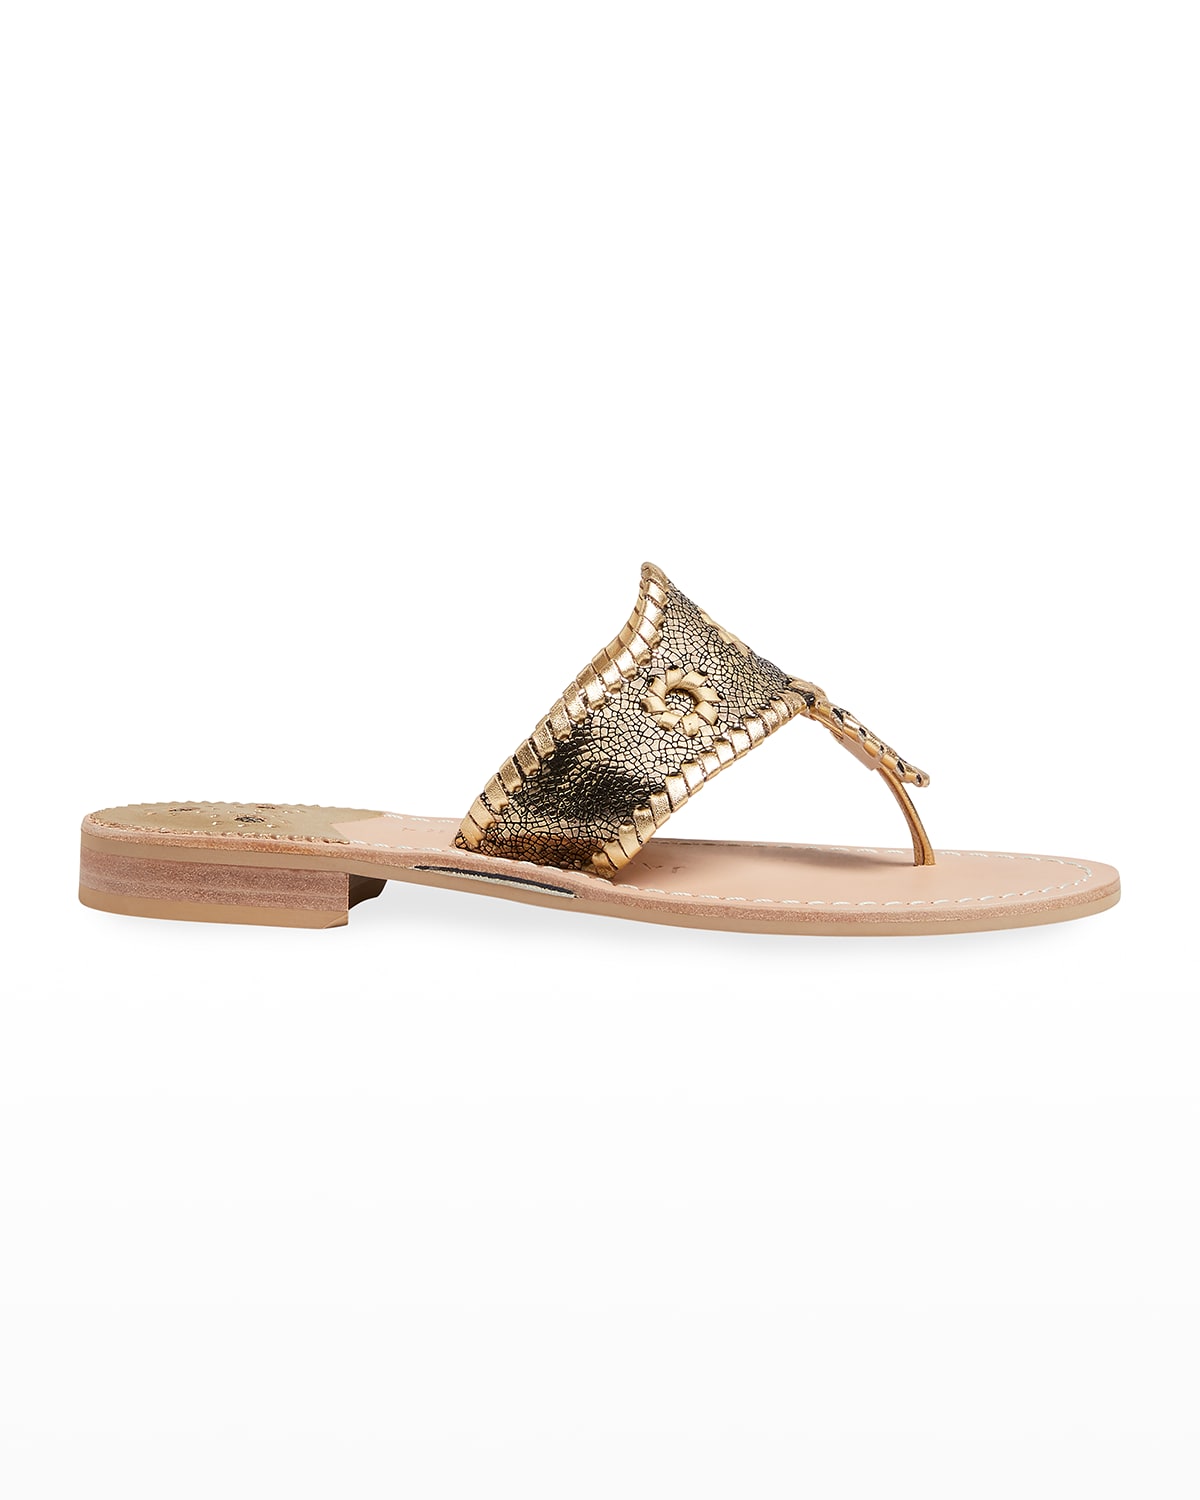 Jack Rogers Jacks Metallic Leather Thong Sandals In Gold/gold